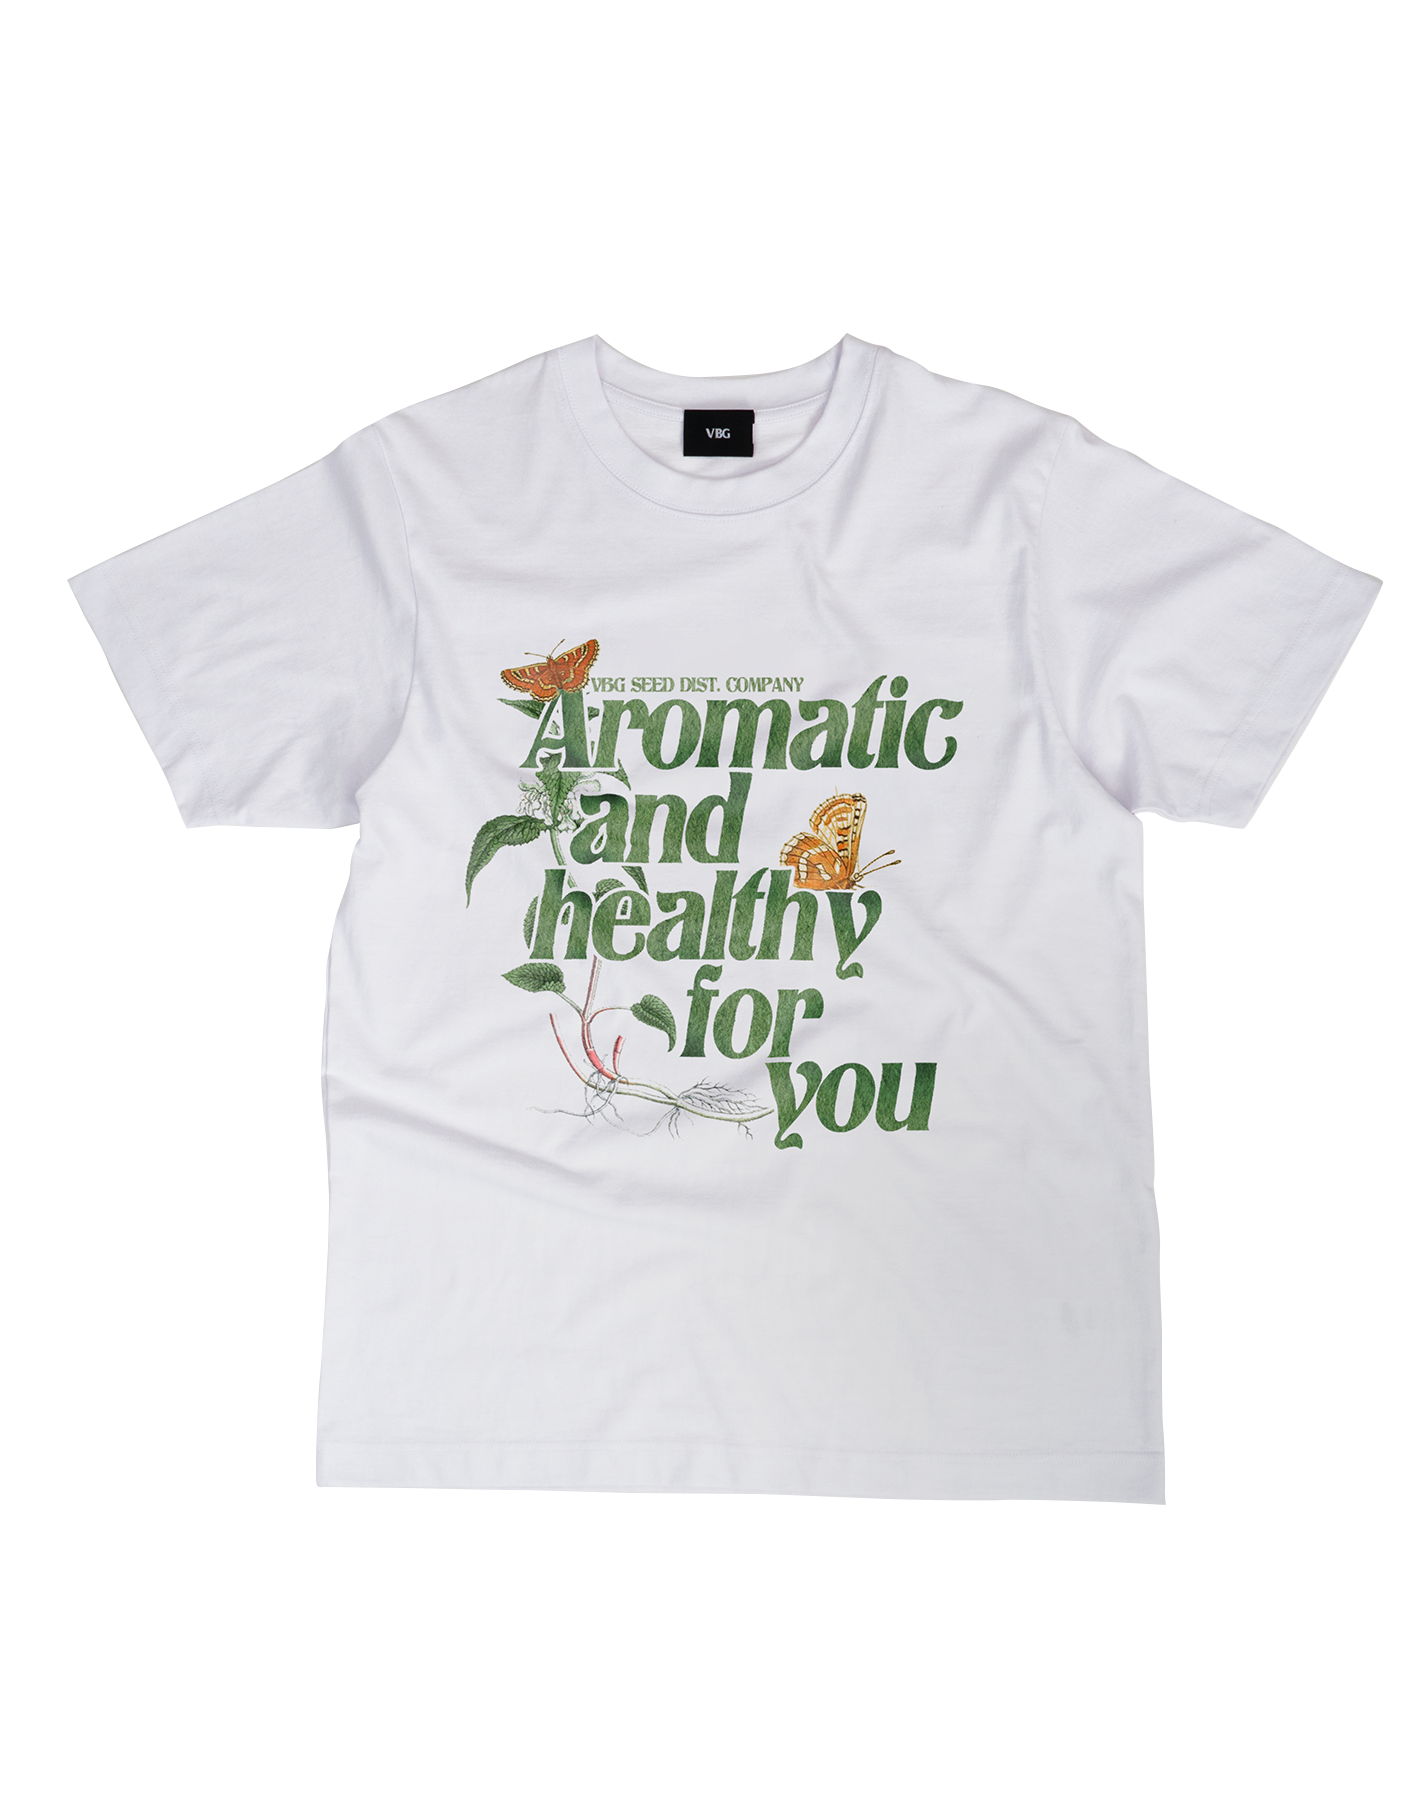 Aroma Therapy T-Shirt - VBG